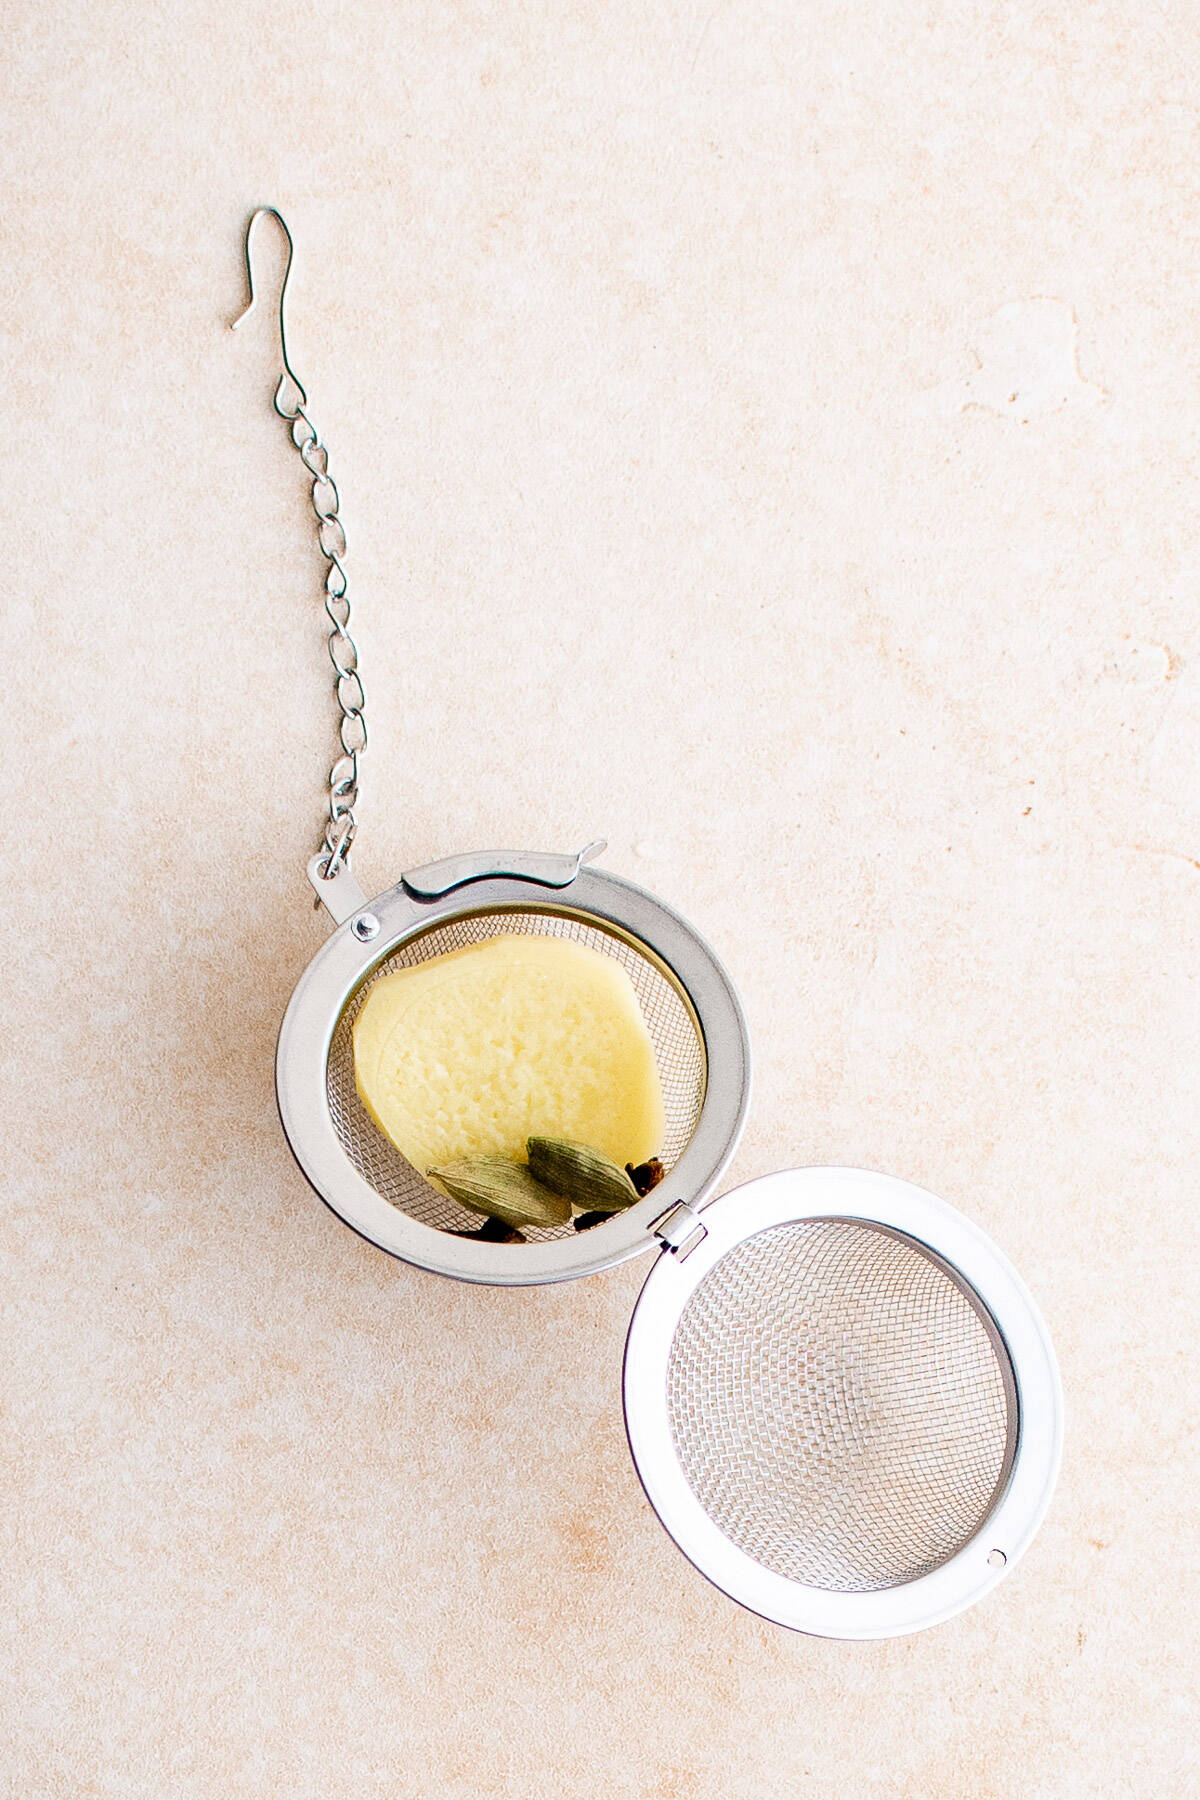 Top down view of an open tea ball with chai latte ingredients.